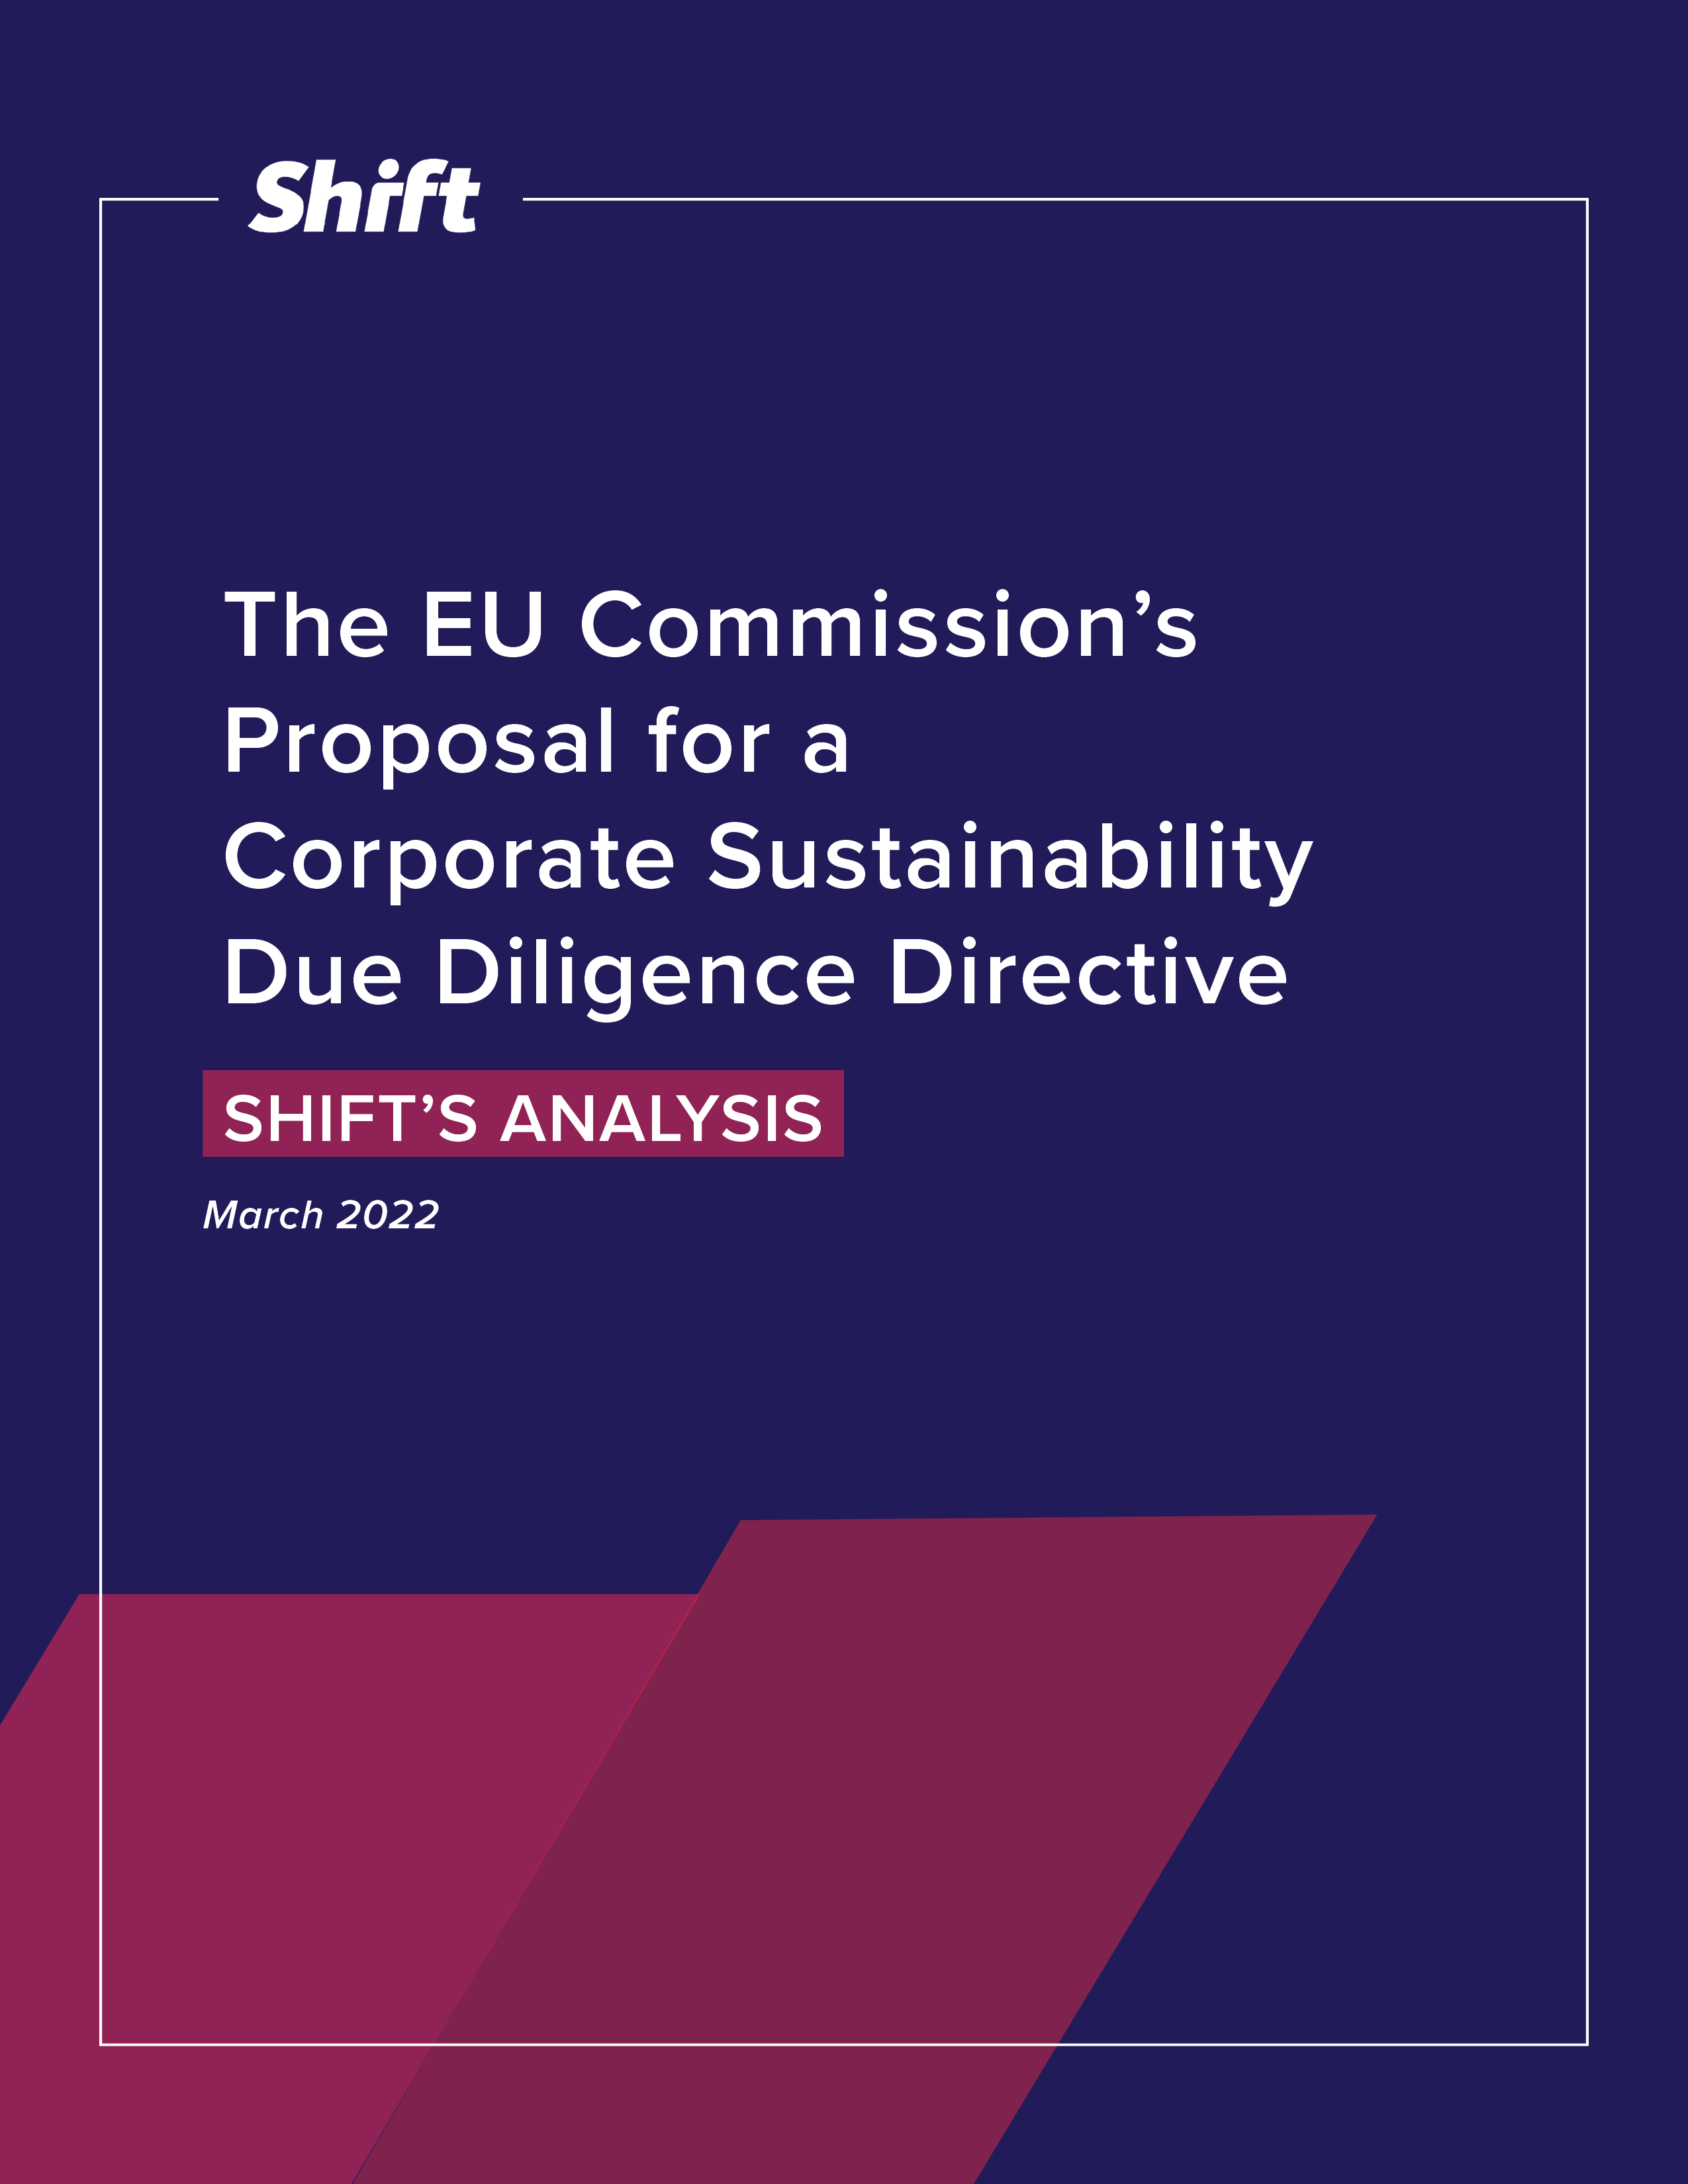 Shift’s Analysis of the EU Commission’s Proposal for a Corporate Sustainability Due Diligence Directive